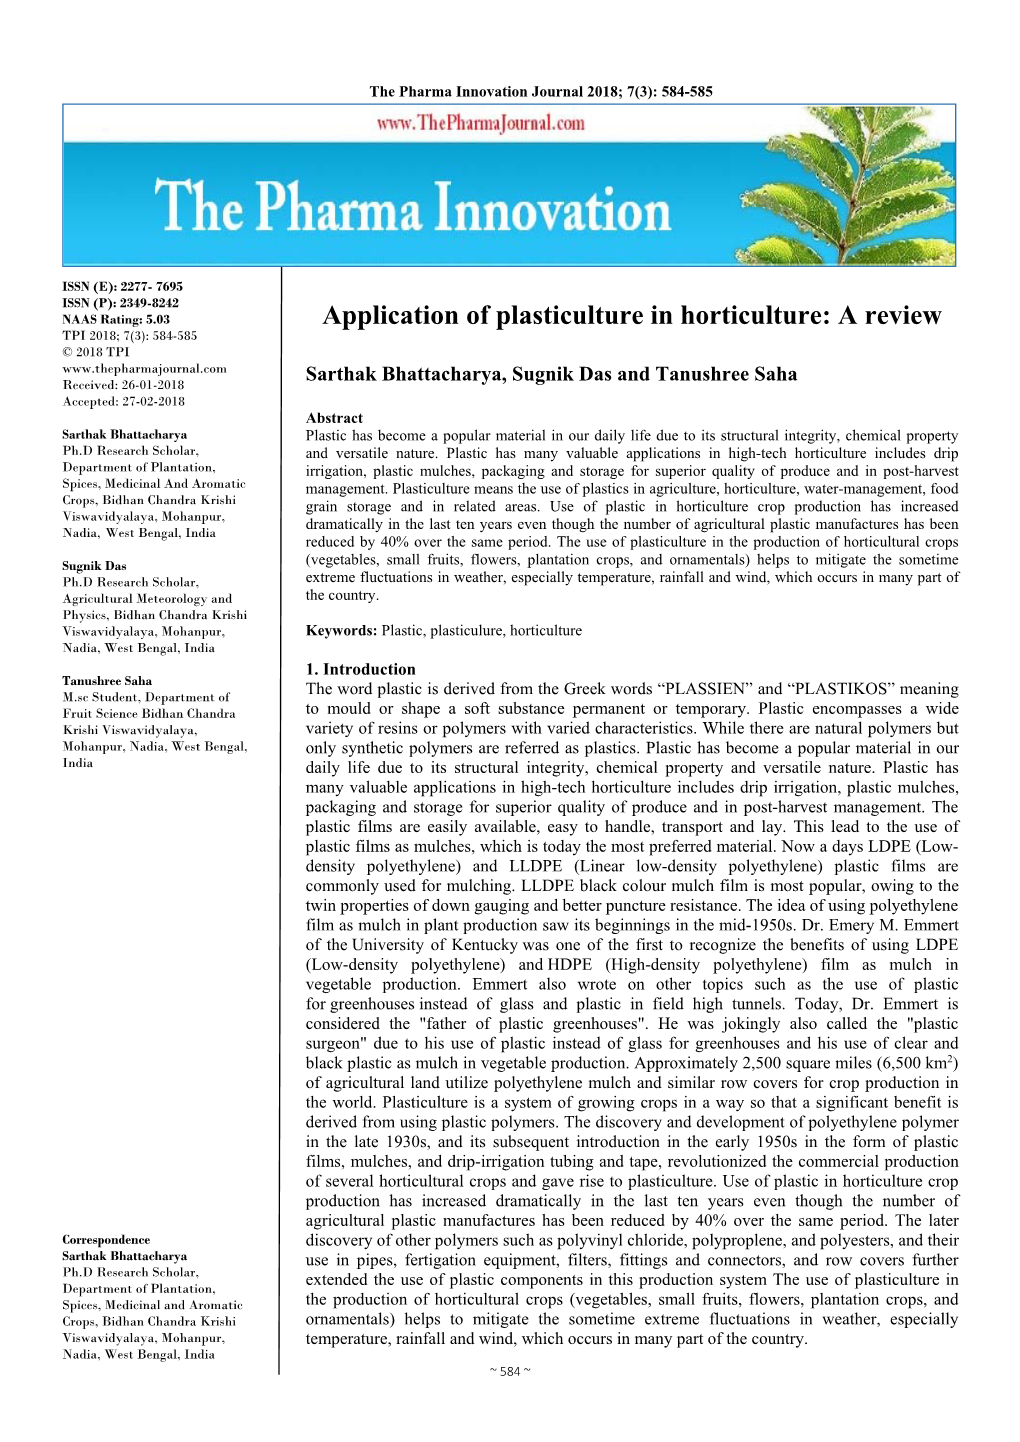 Application of Plasticulture in Horticulture: a Review